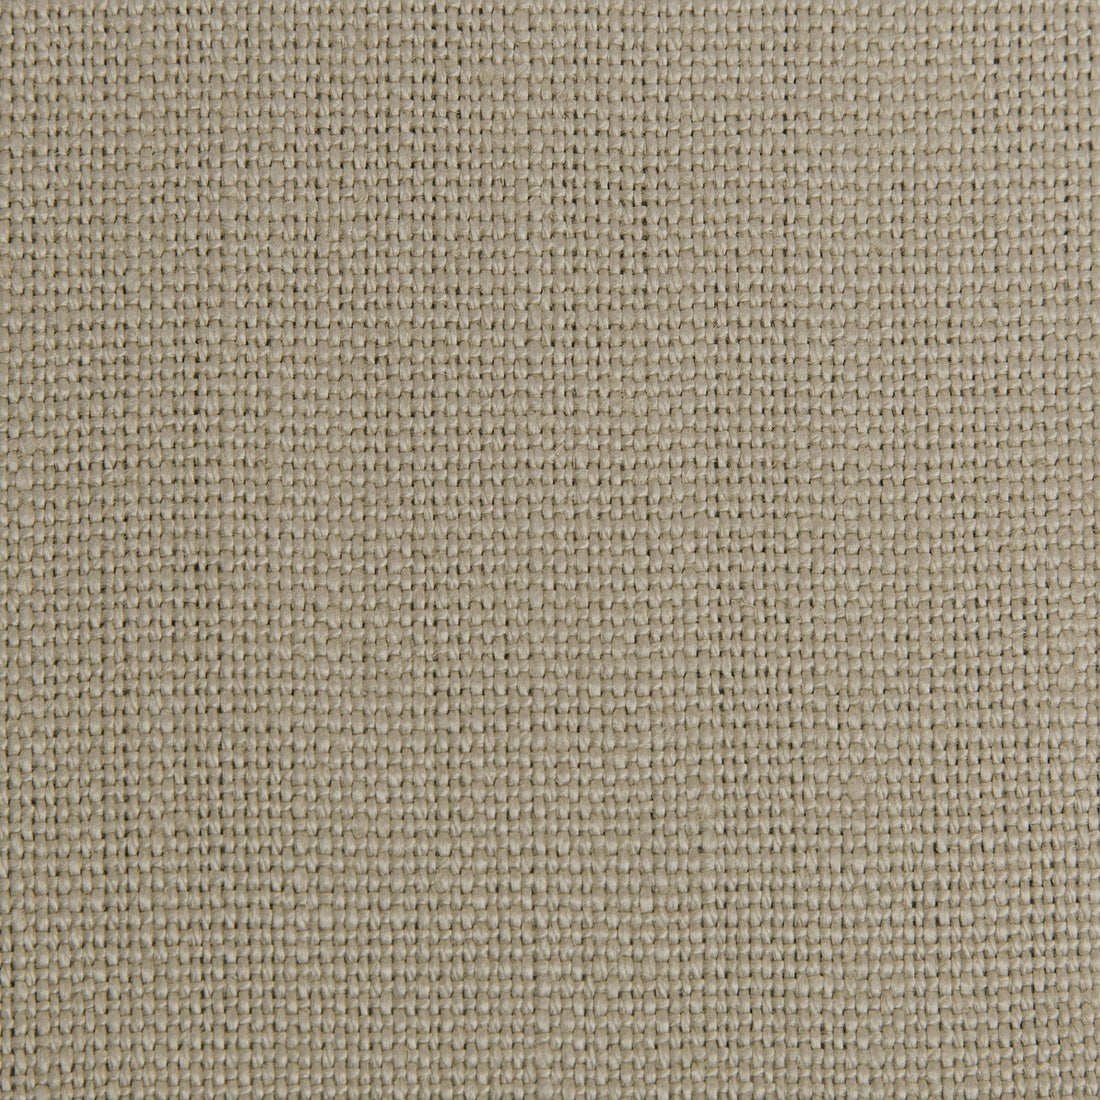 Stone Harbor fabric in taupe color - pattern 27591.1661.0 - by Kravet Basics